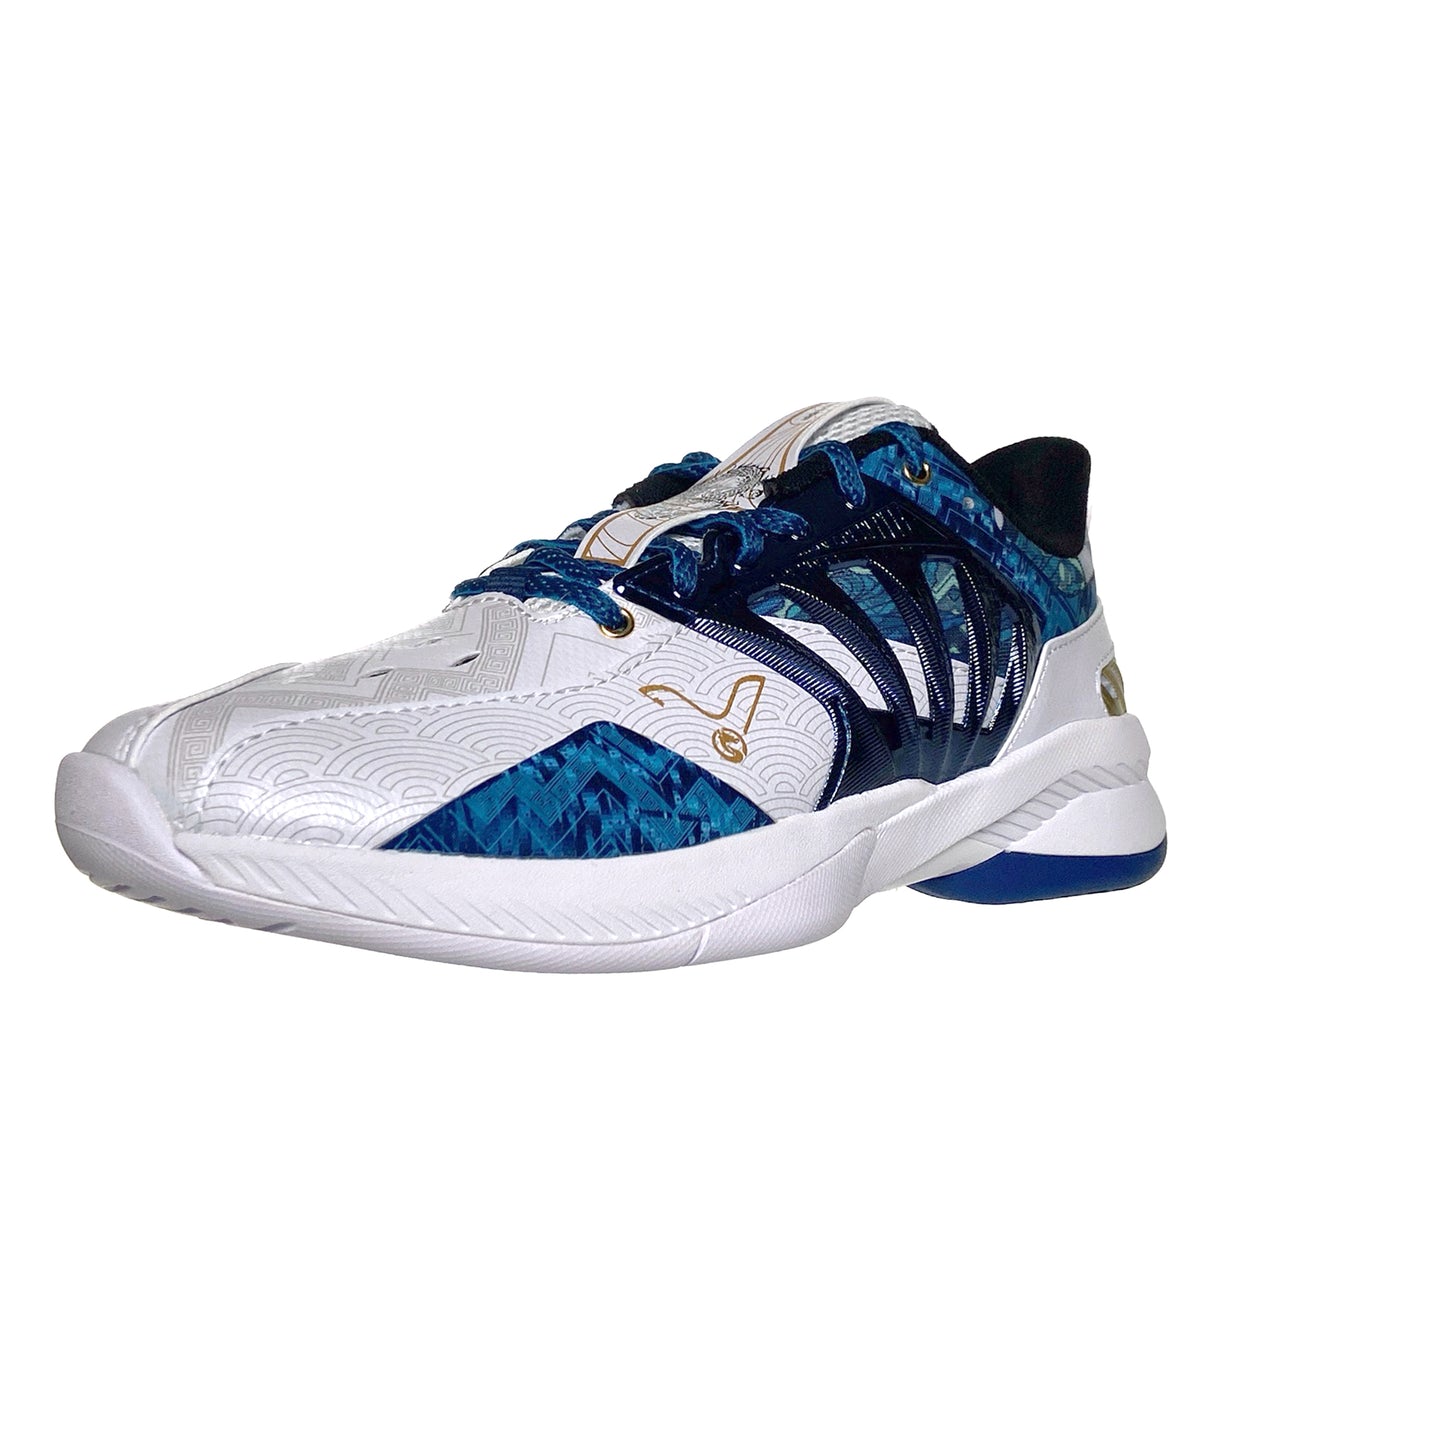 Victor Indoor Homme Édition CNY A790CNY-EX AB Blanc/Bleu